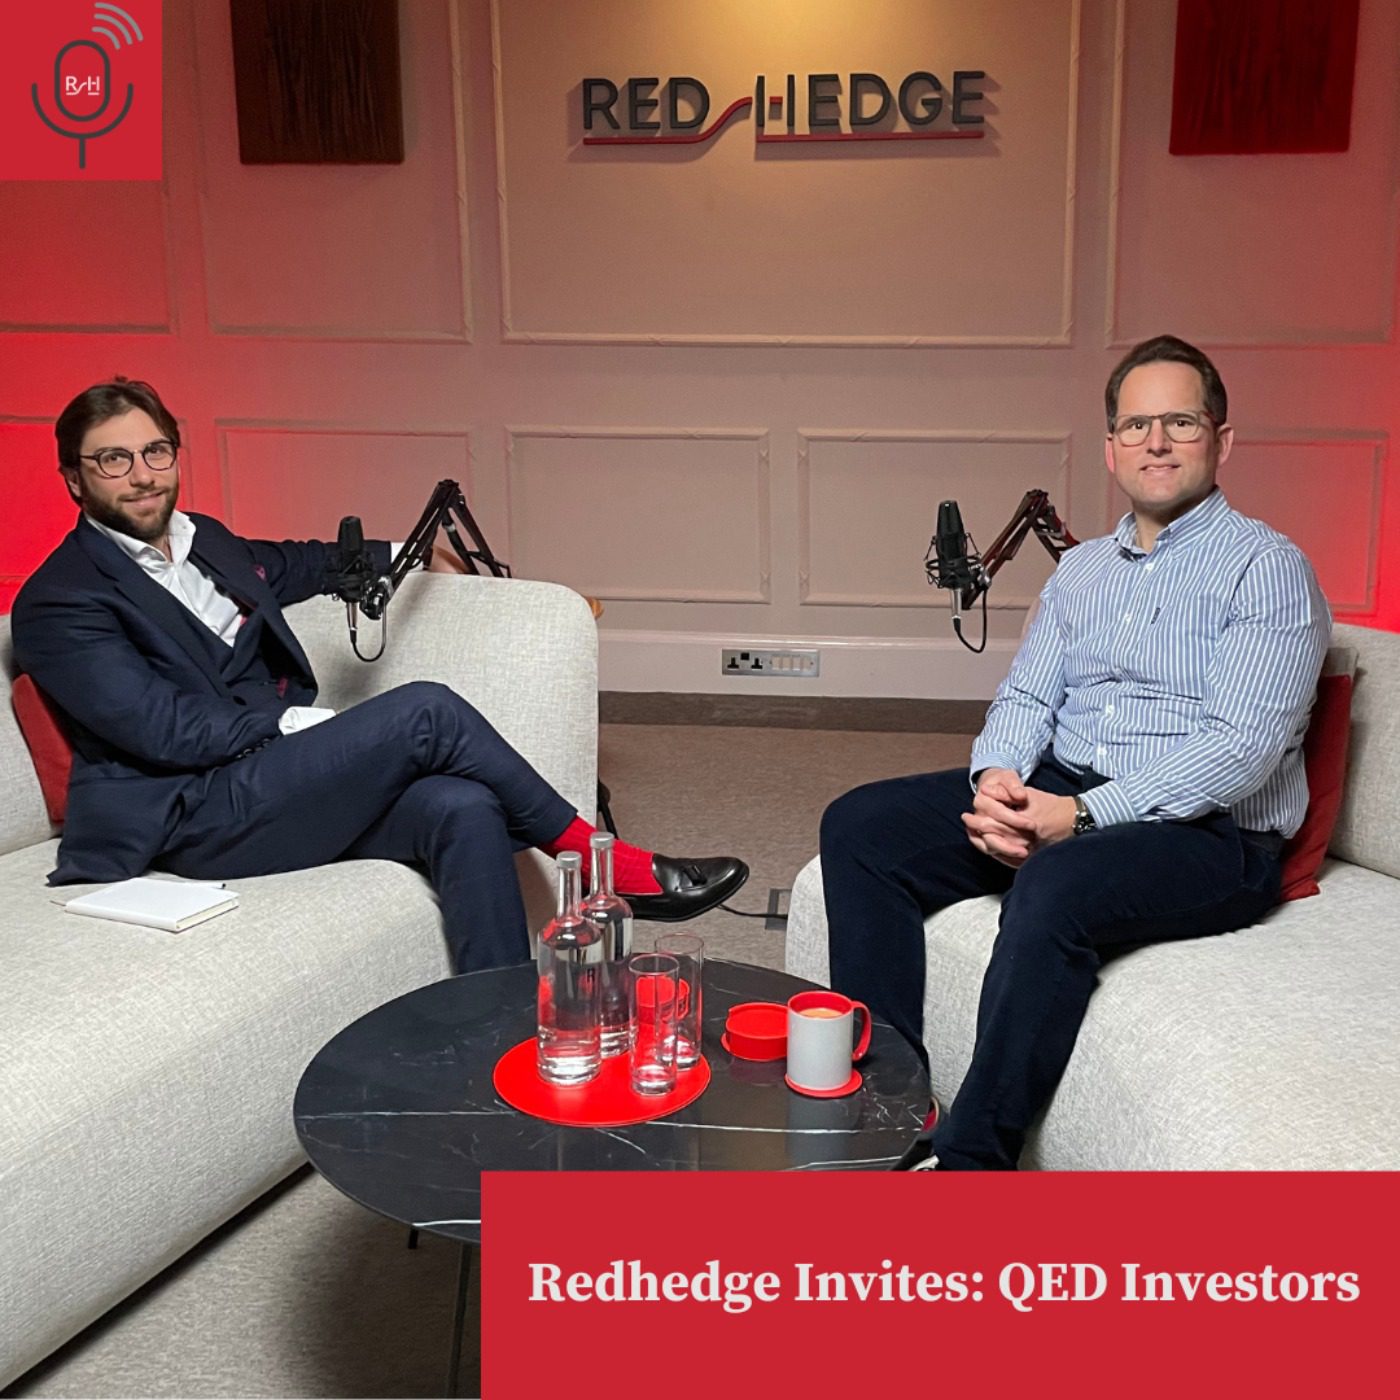 Redhedge Invites: Discussing Fintech with QED Investors